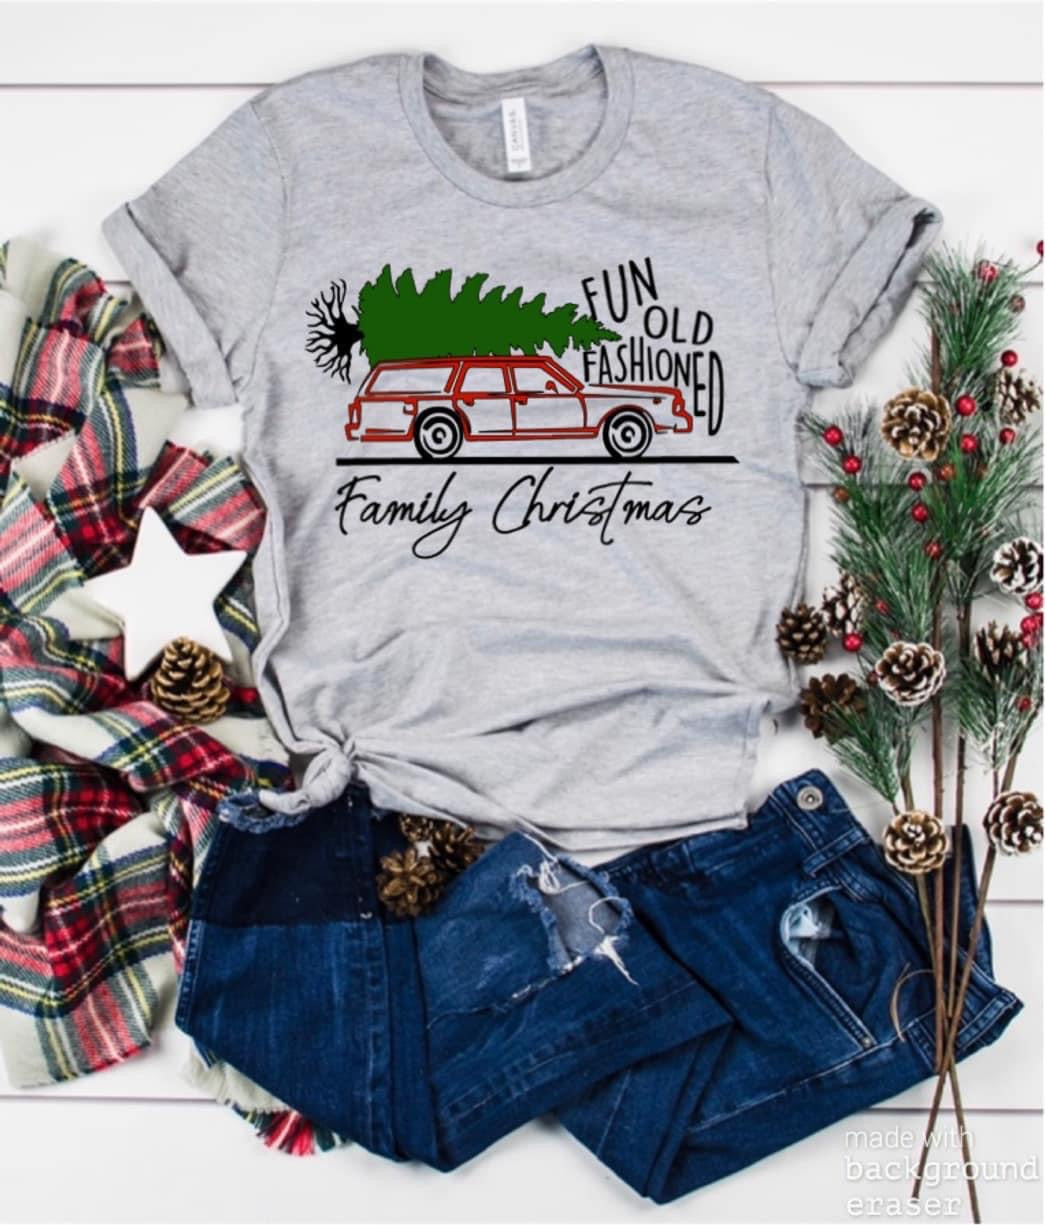 Fun Old Fashioned Family Christmas Tee